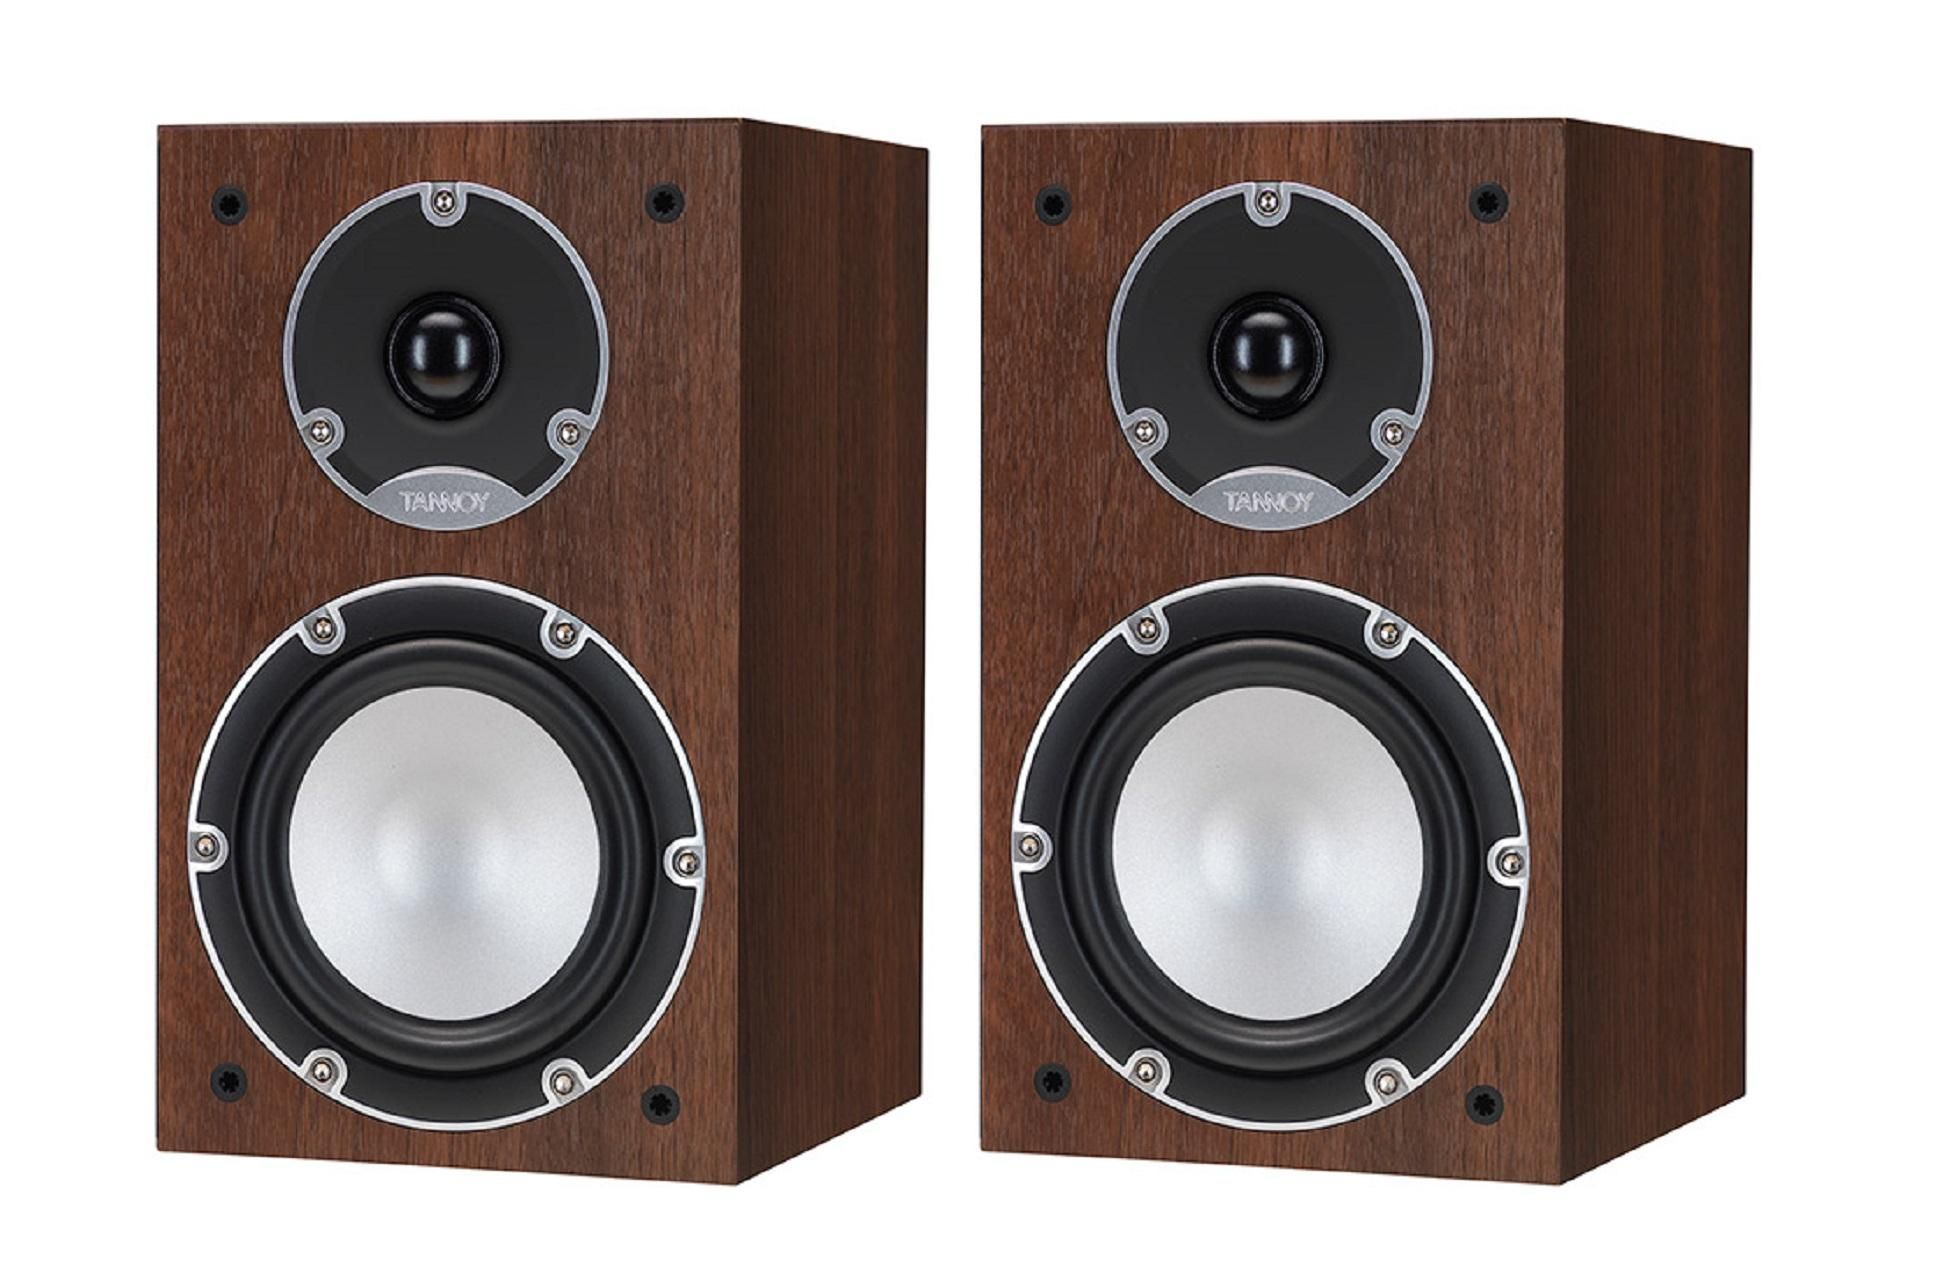 Product Review Tannoy Mercury 7 1 Speakers Richer Sounds Blog